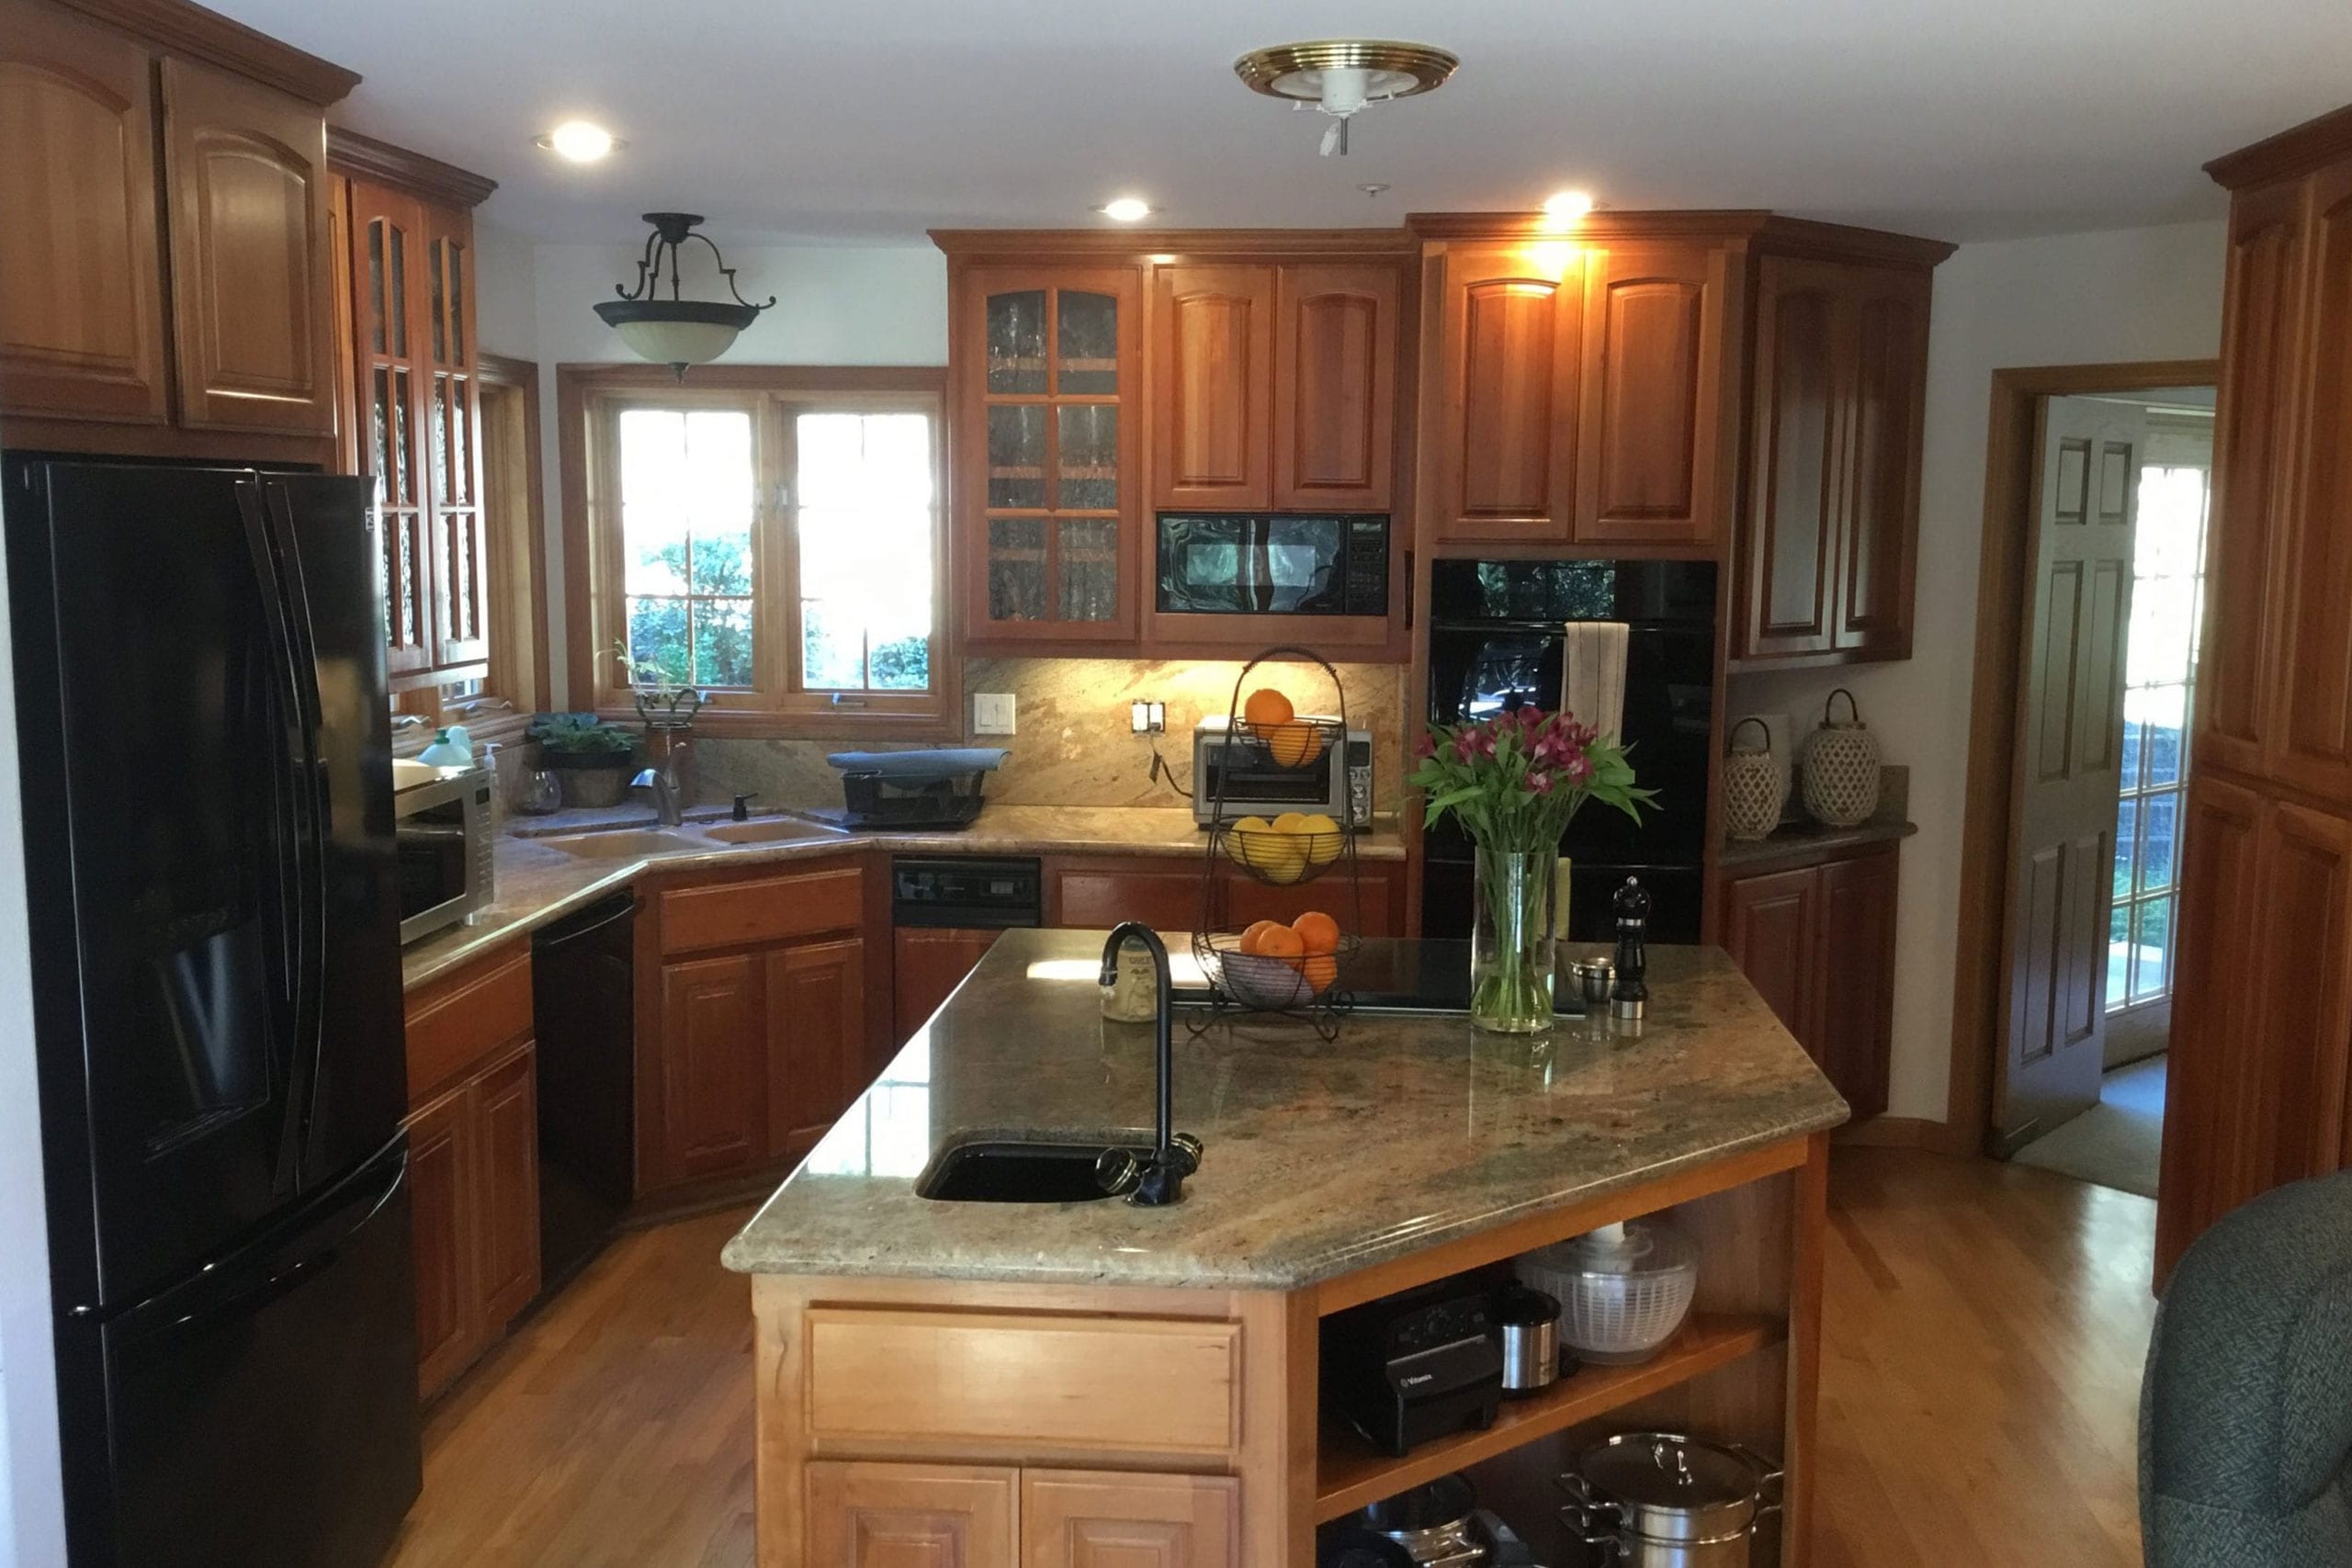 Kitchen remodel before a rustic and beautiful remodel